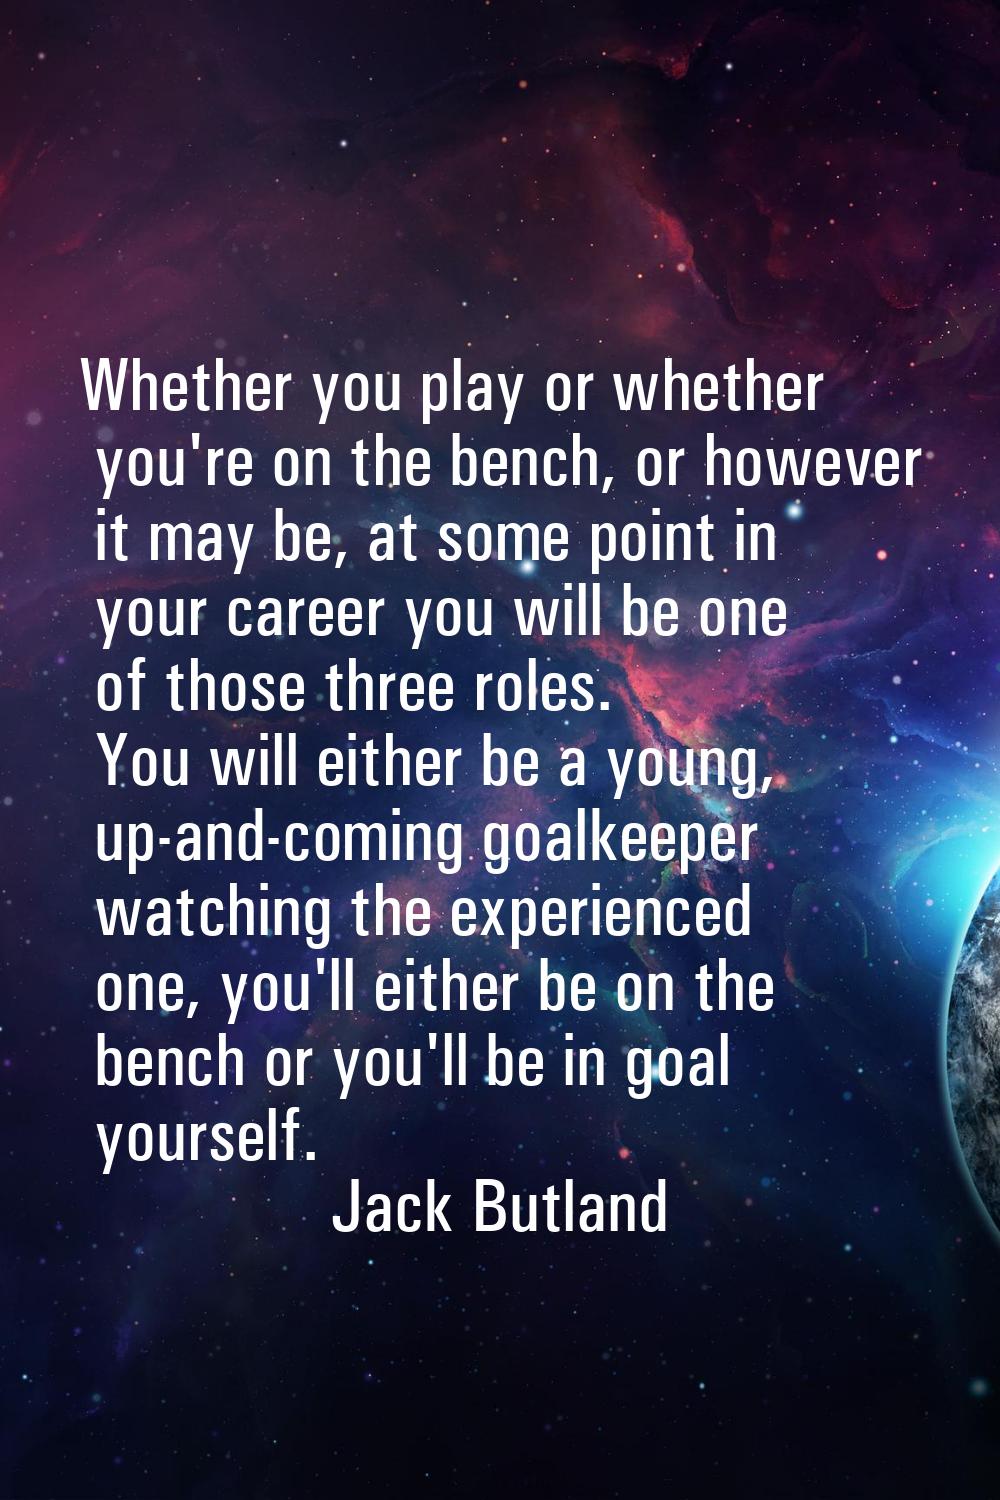 Whether you play or whether you're on the bench, or however it may be, at some point in your career